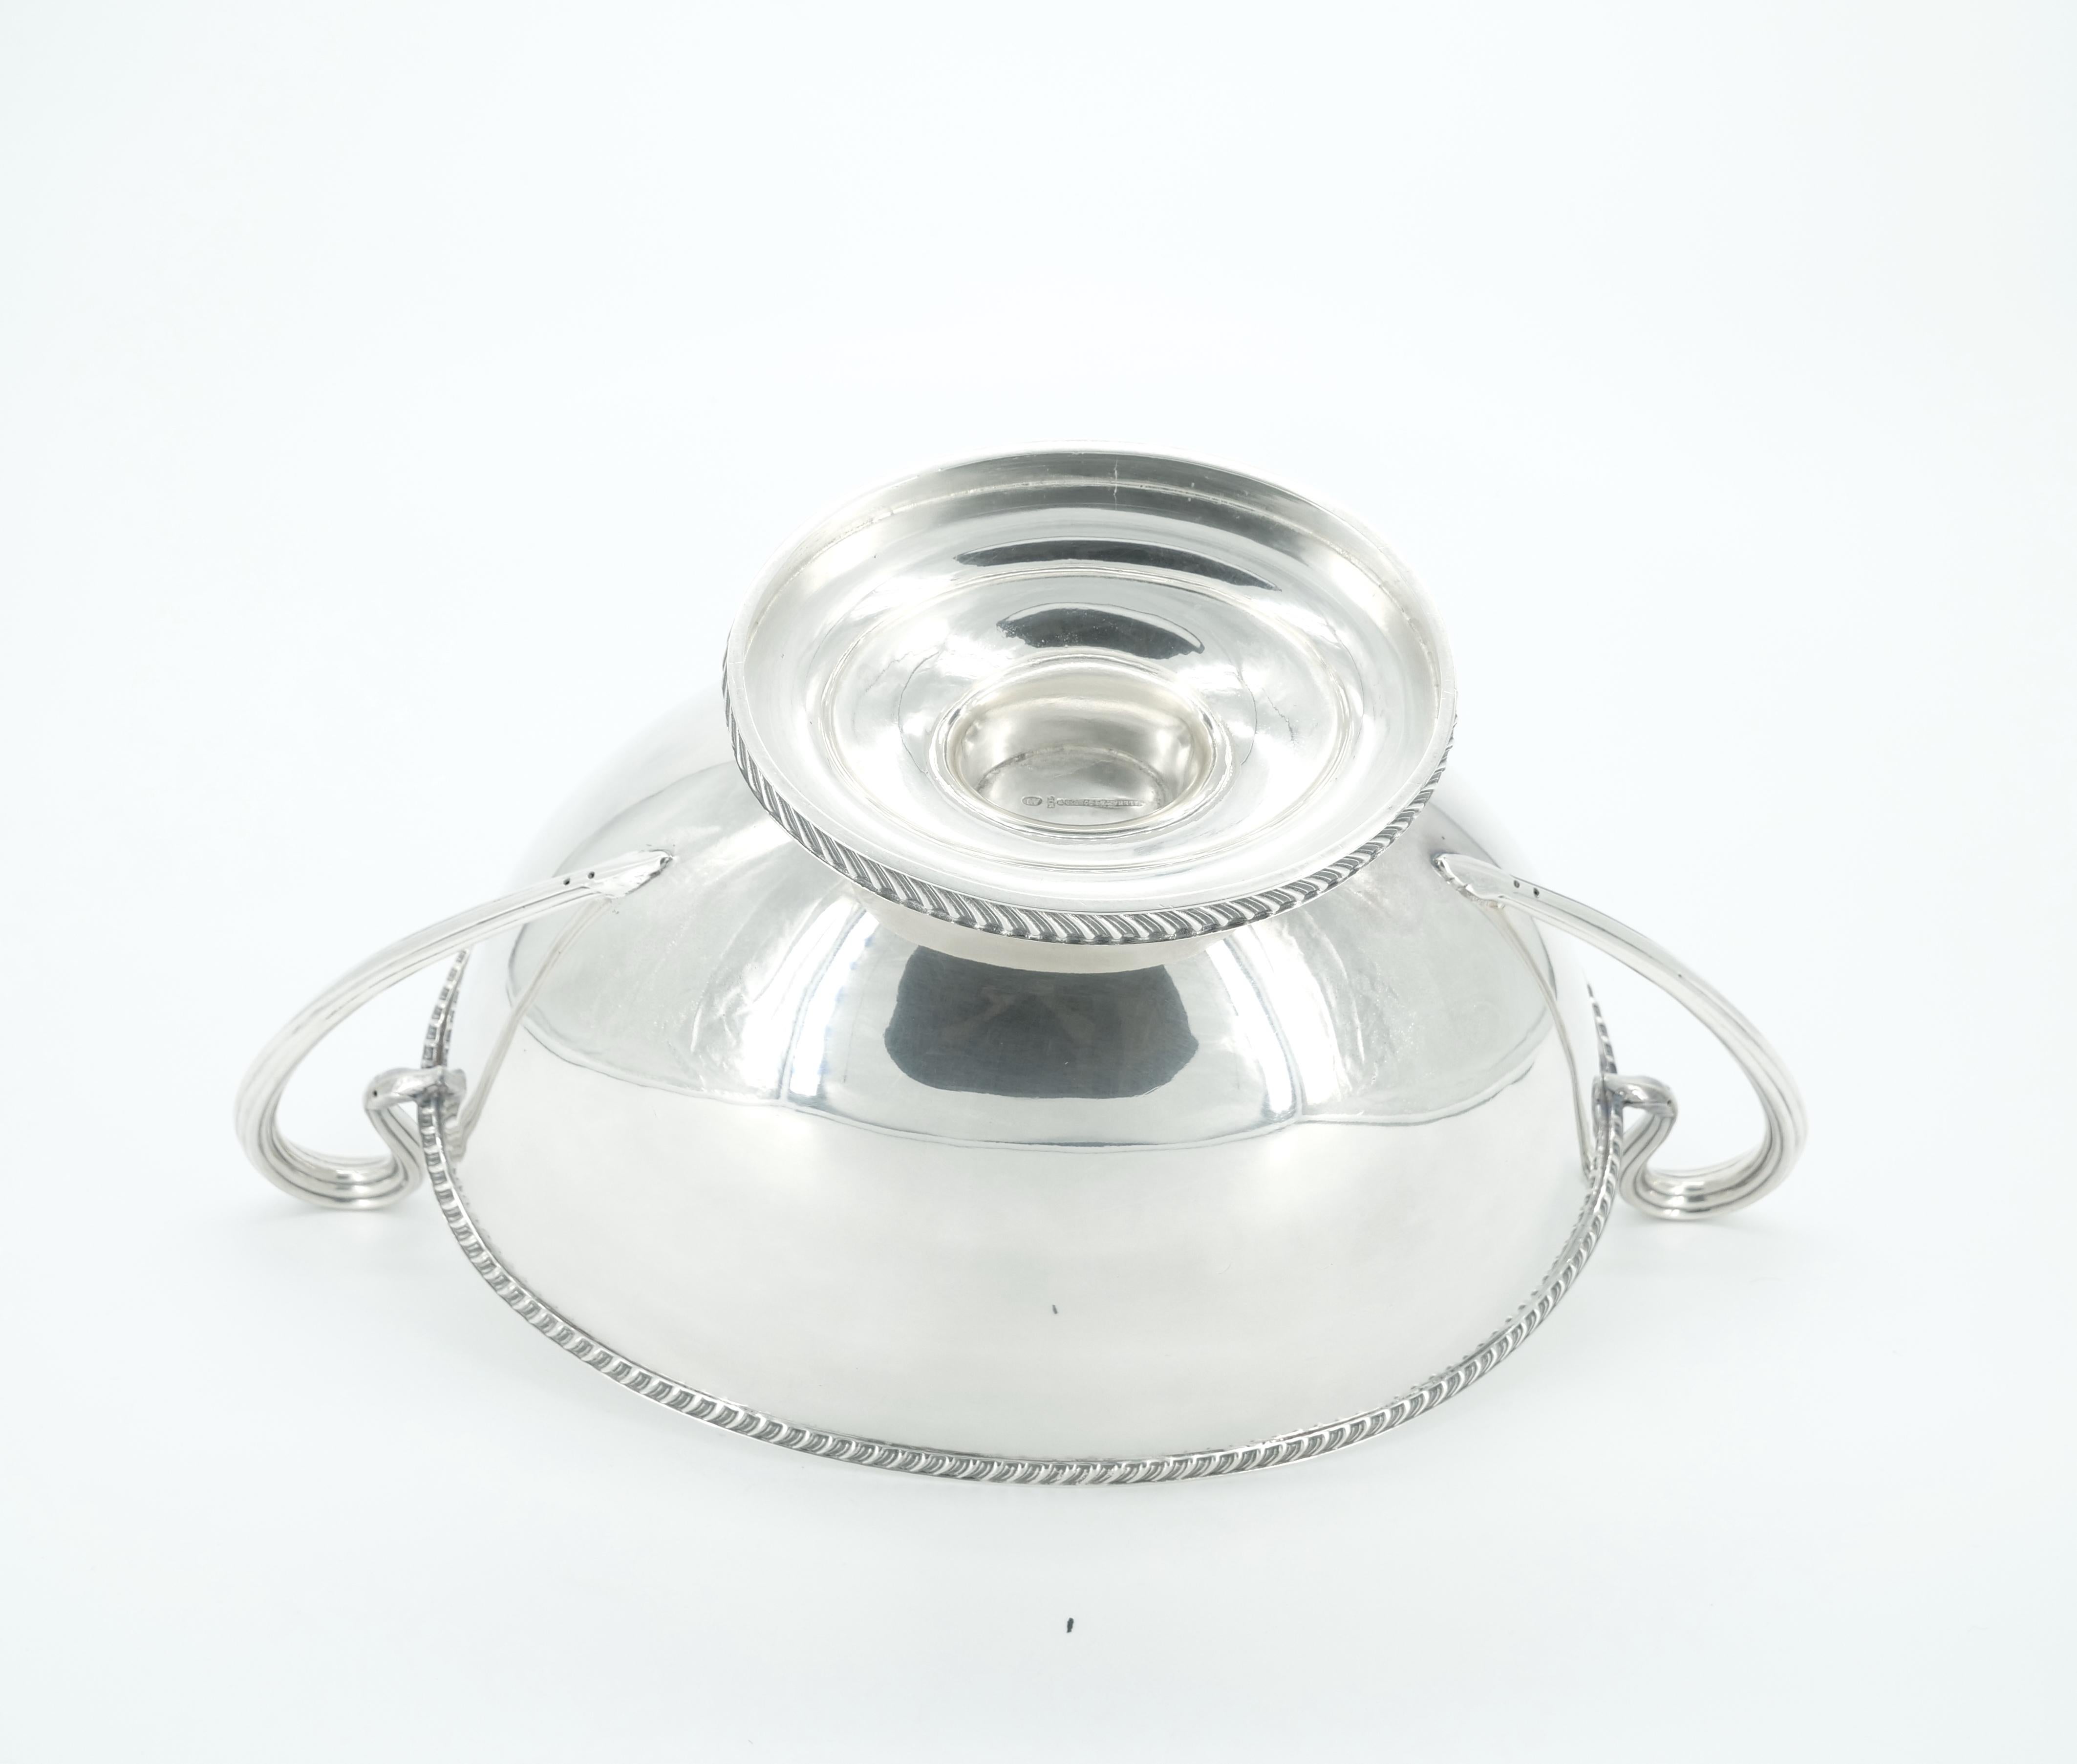 Large English Silver Plate Tableware Covered Tureen For Sale 8